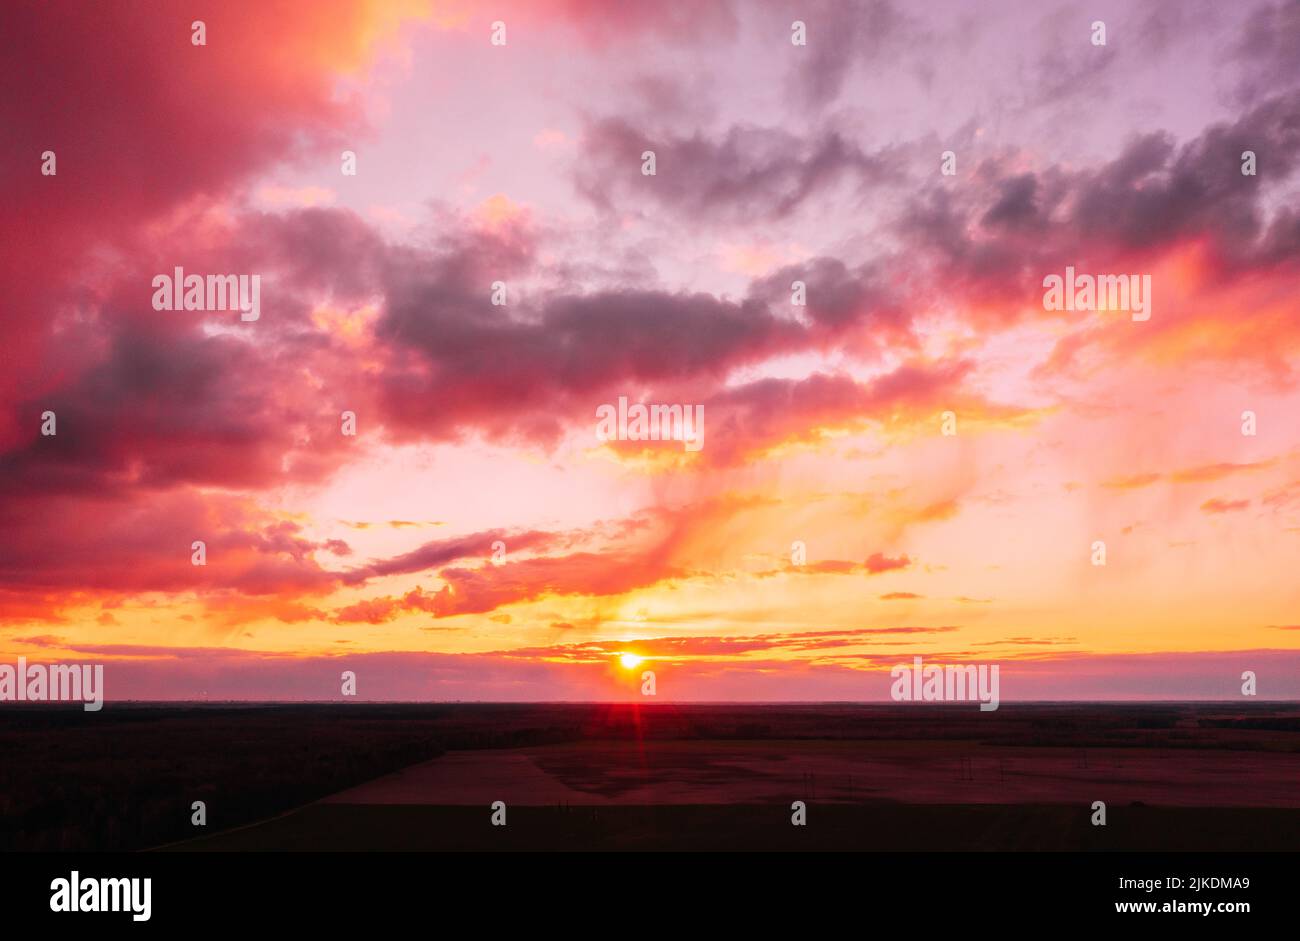 Sunset sunrise colorful sky over field or meadow. Bright dramatic sky and dark ground. Countryside landscape under scenic amazing natural bright Stock Photo